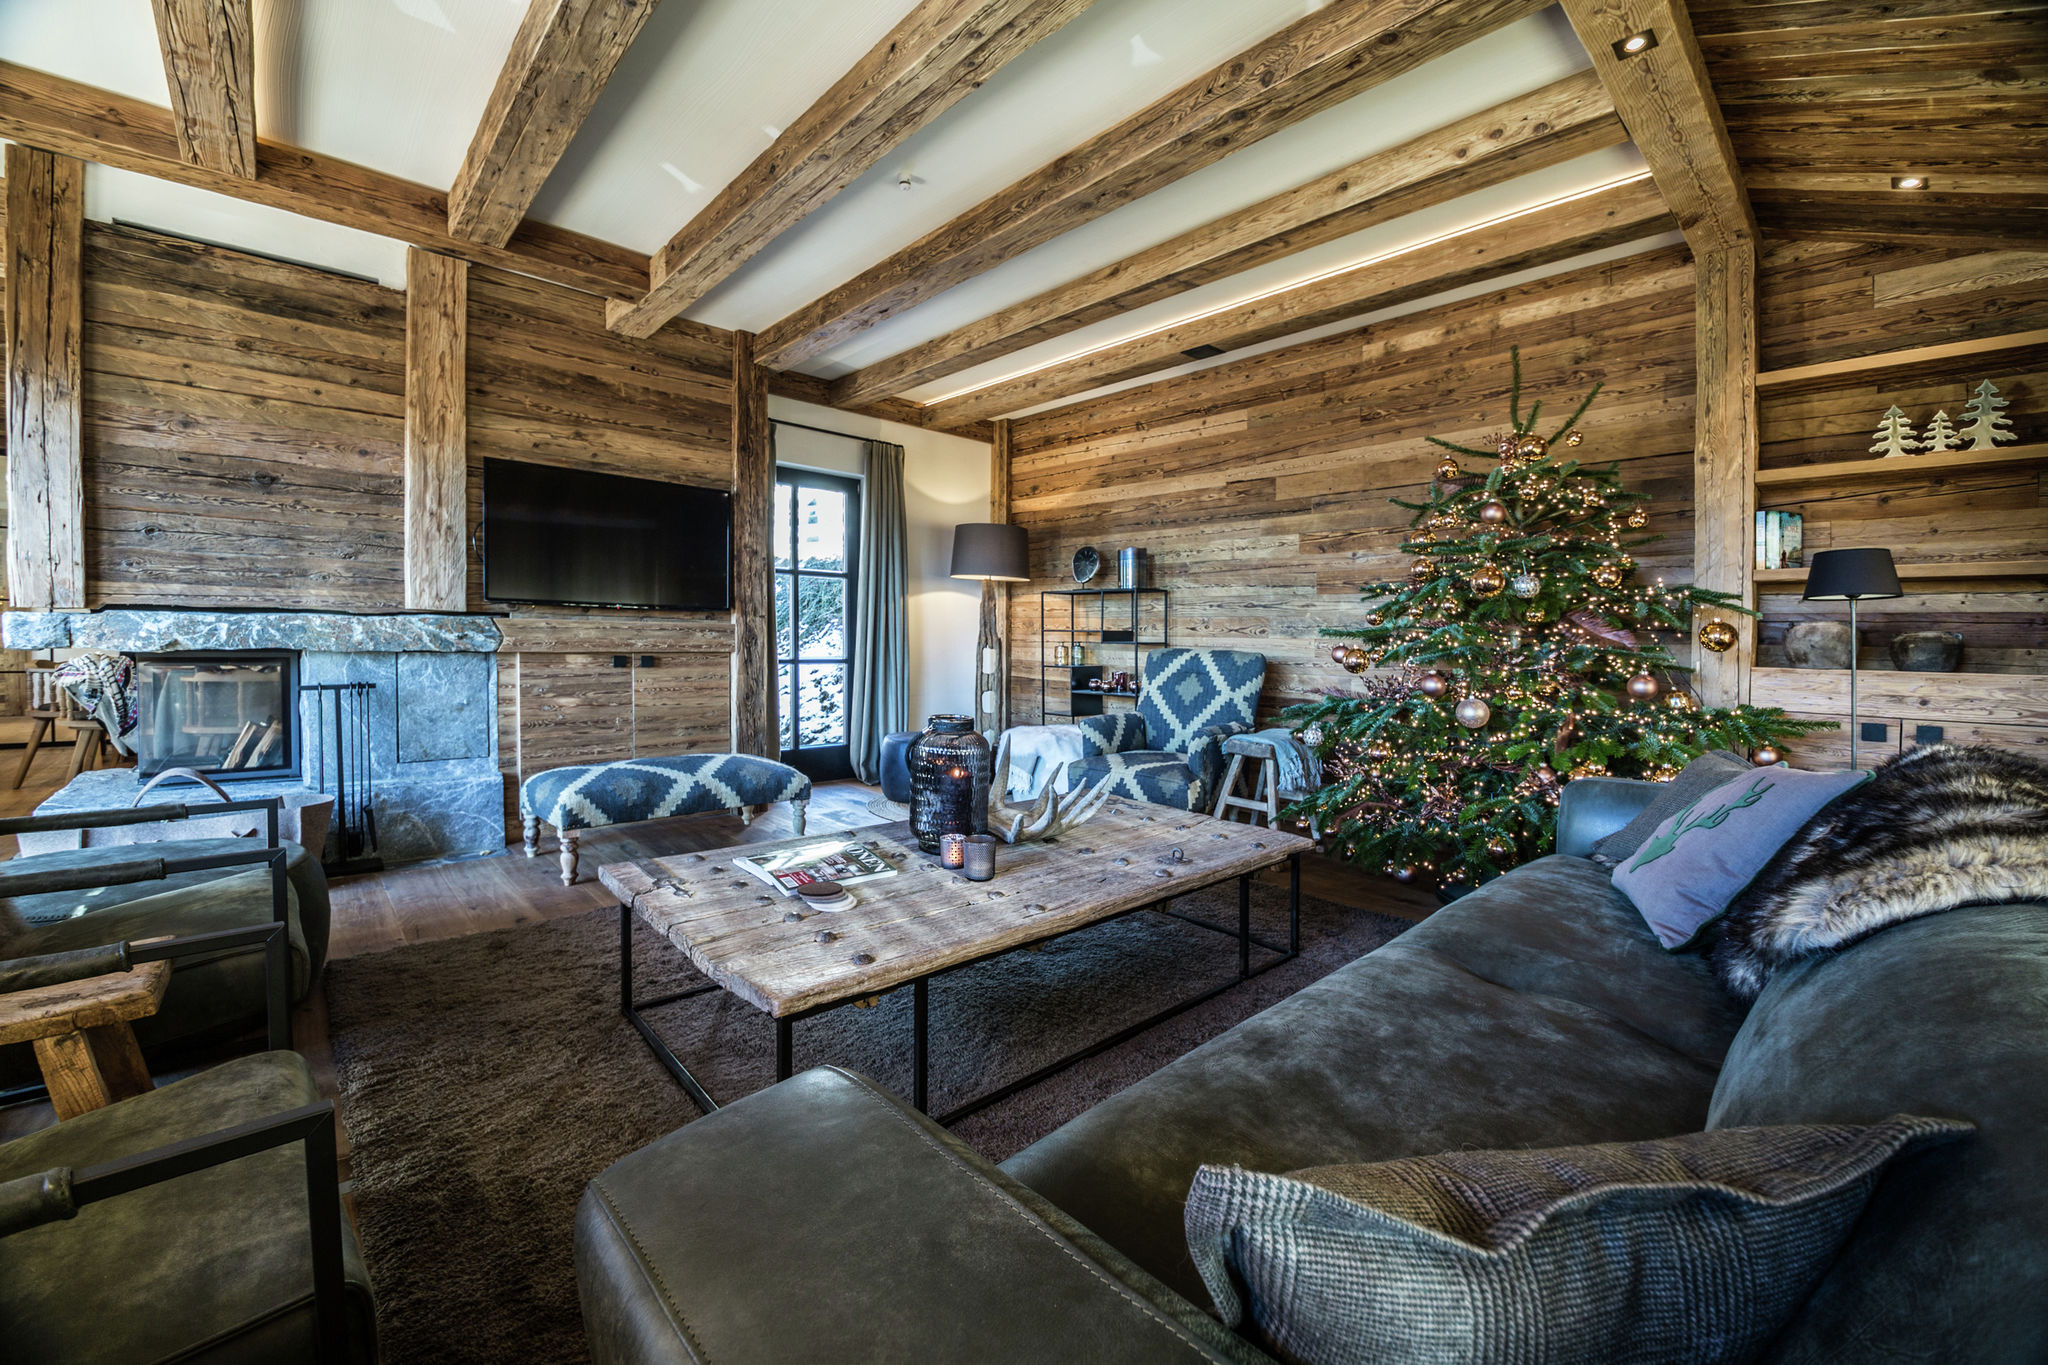 Premium chalet in Wagrain with 2 saunas and pool